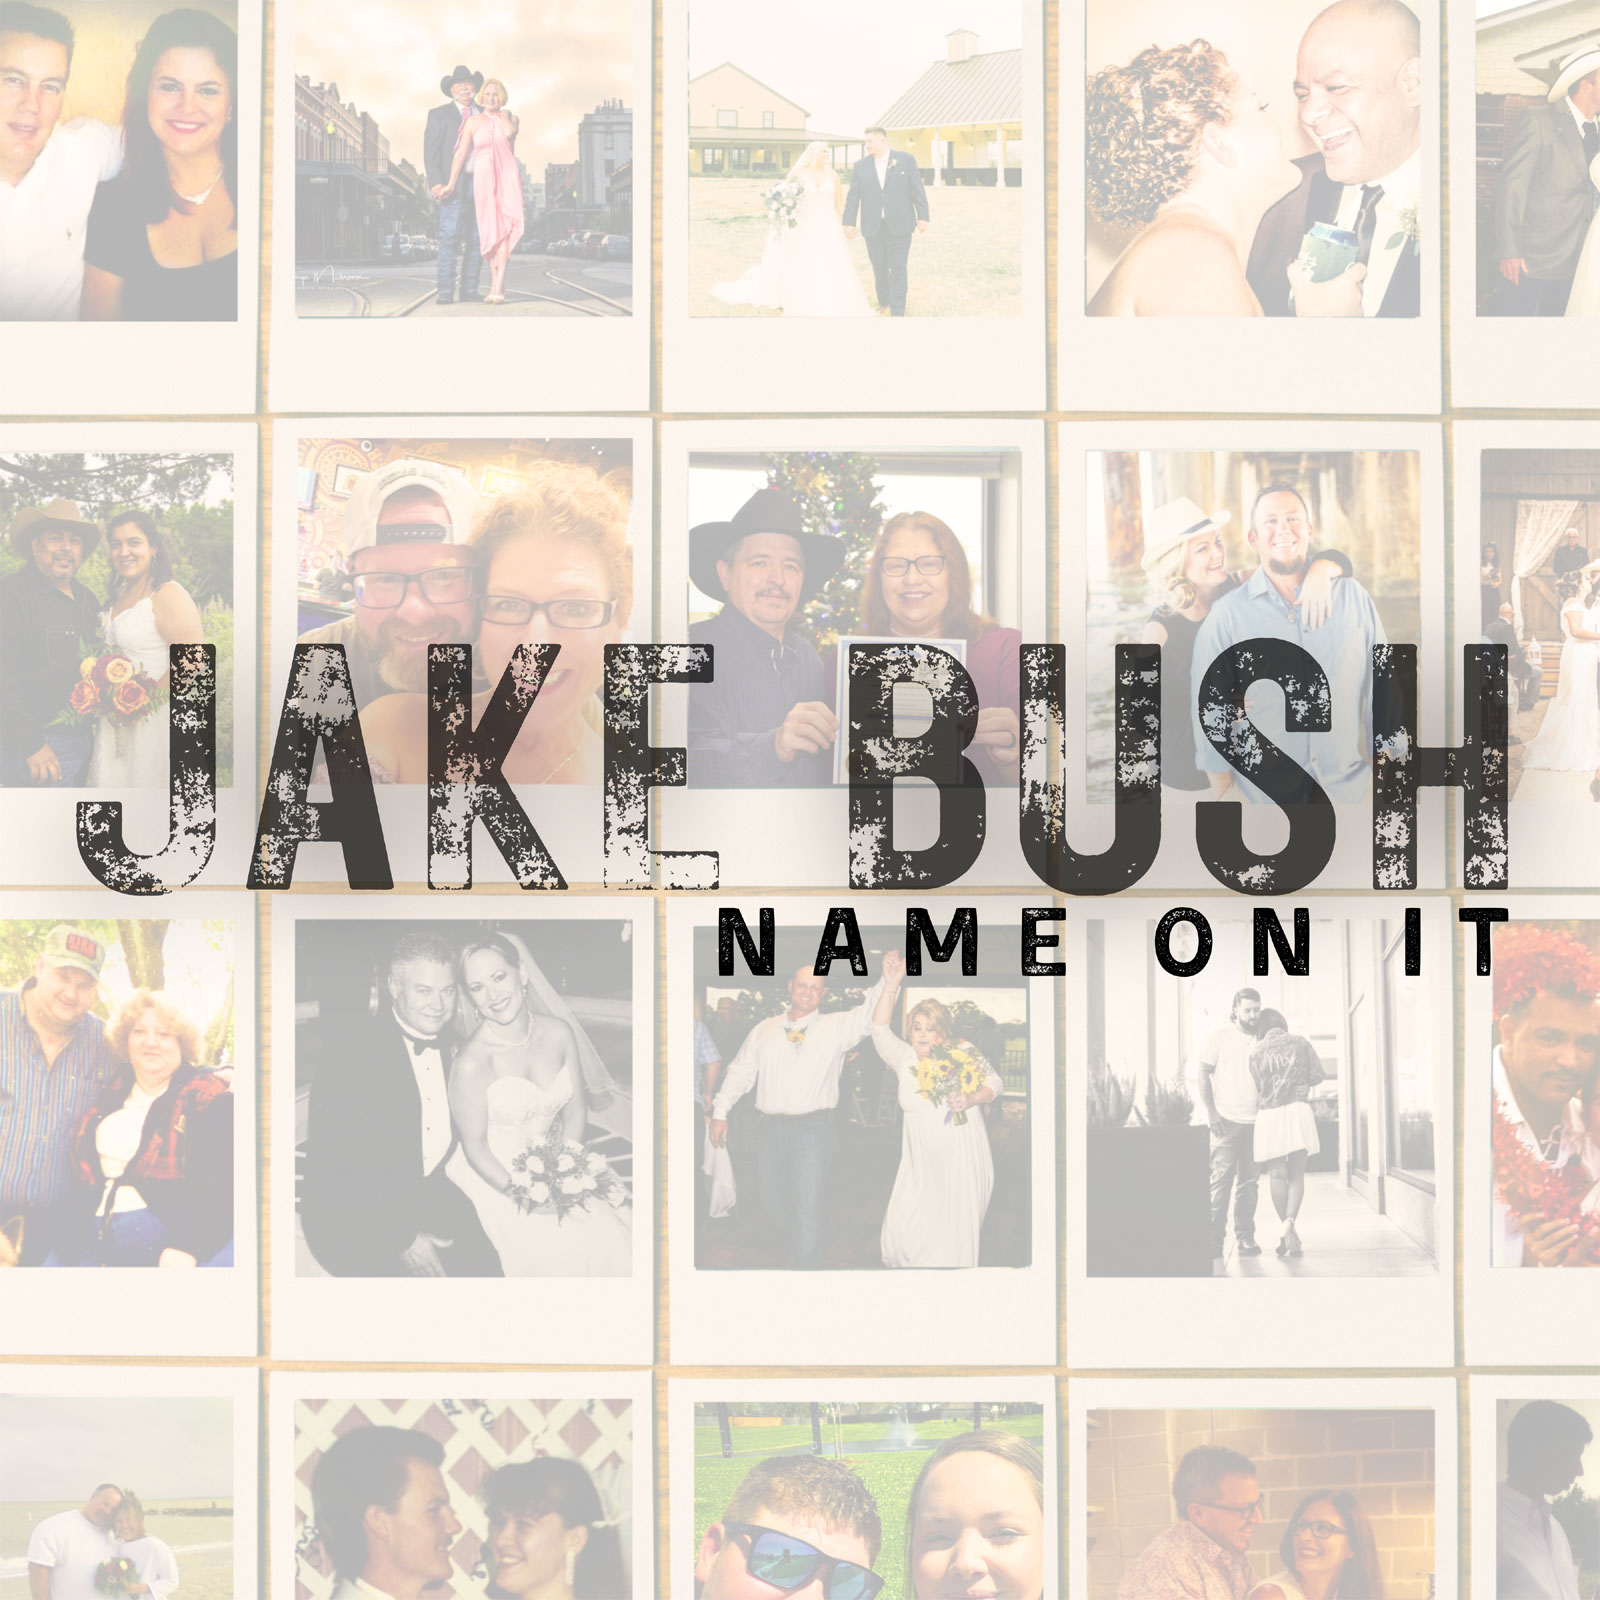 Art for Name On It by Jake Bush